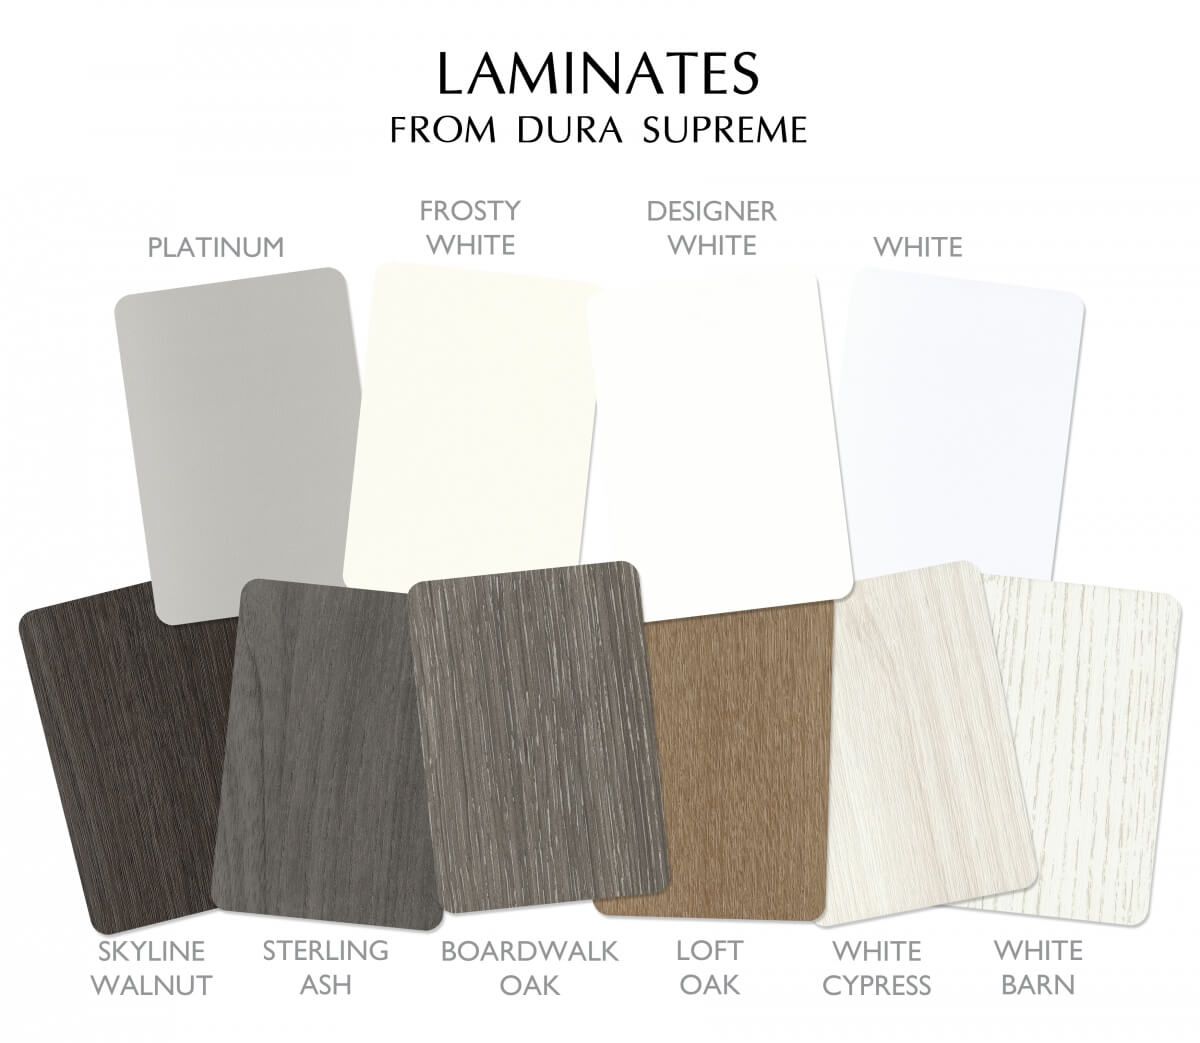 Laminates from Dura Supreme Cabinetry. Solid colos and textured wood grains for Laminate Cabinets.